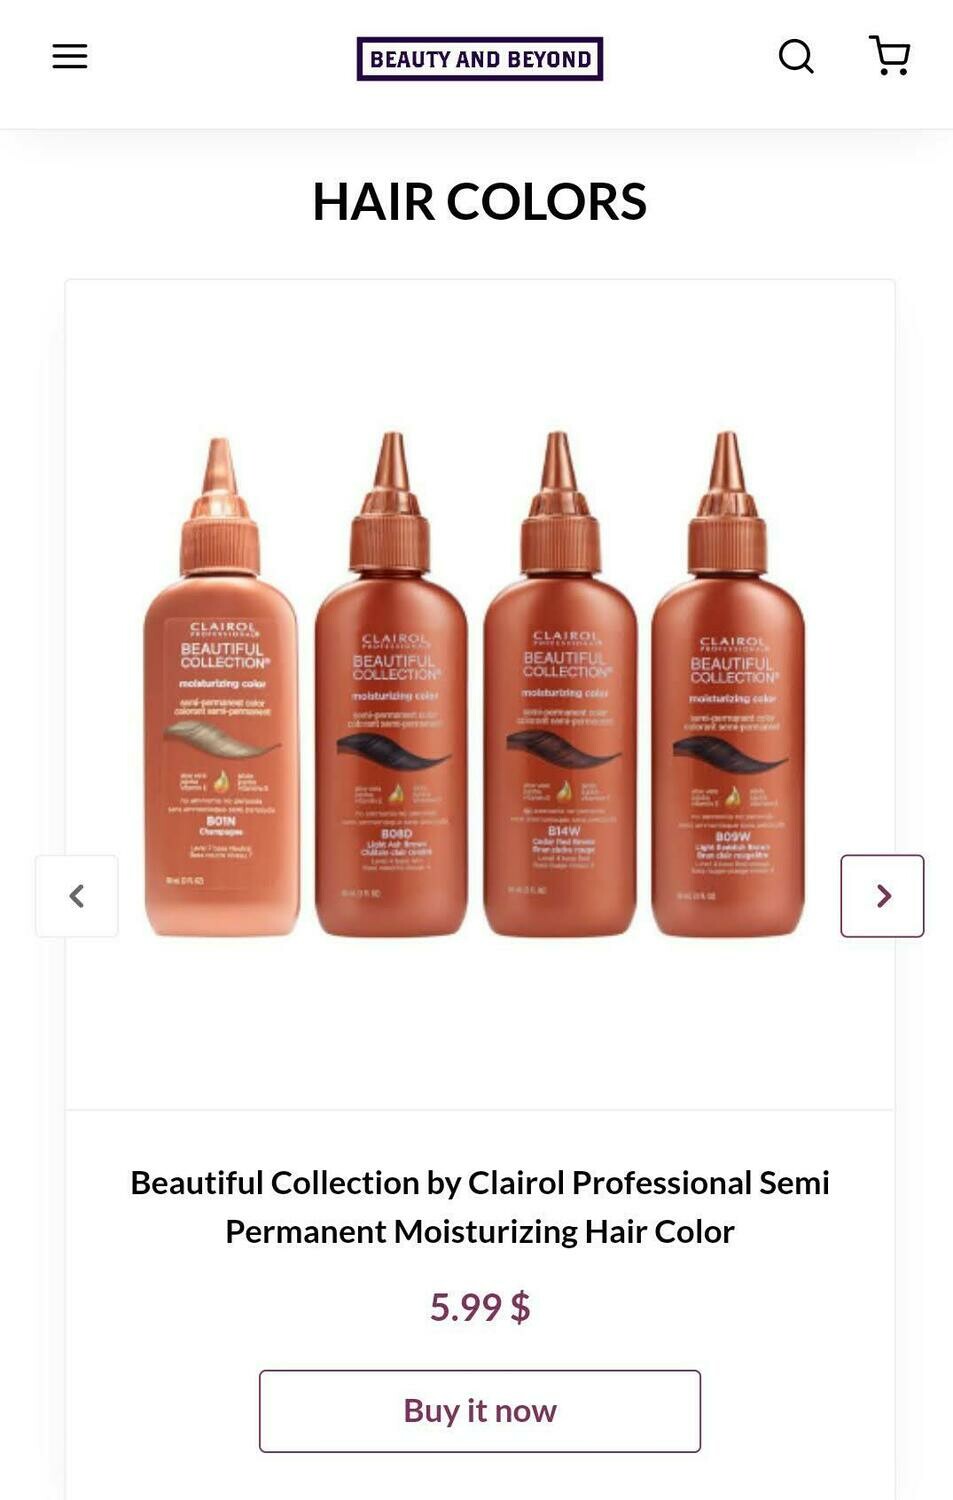 Beautiful Collection by Clairol Professional Semi Permanent Moisturizing Hair Color